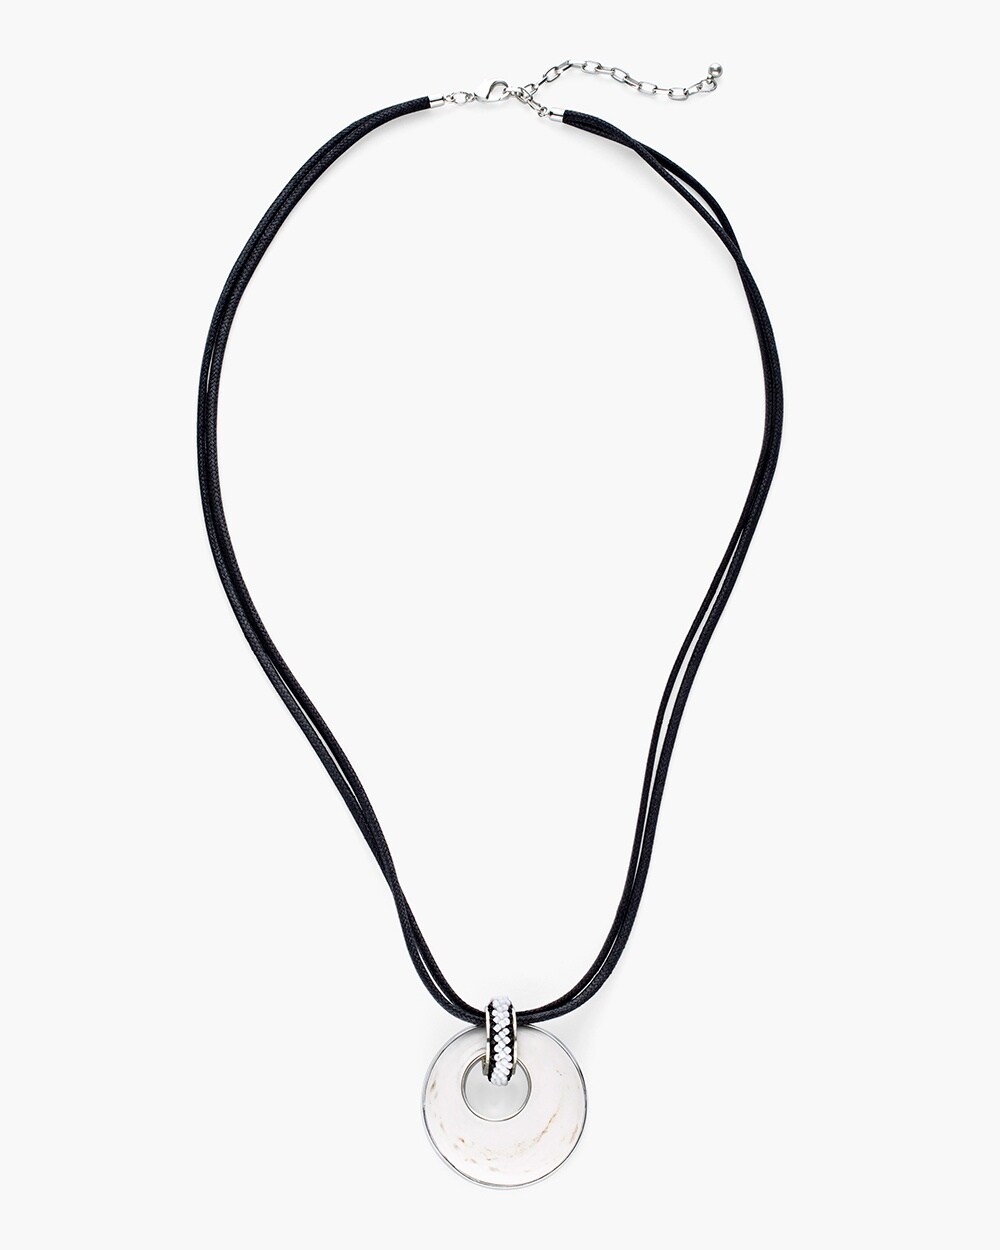 Long Black and White Pendant Necklace